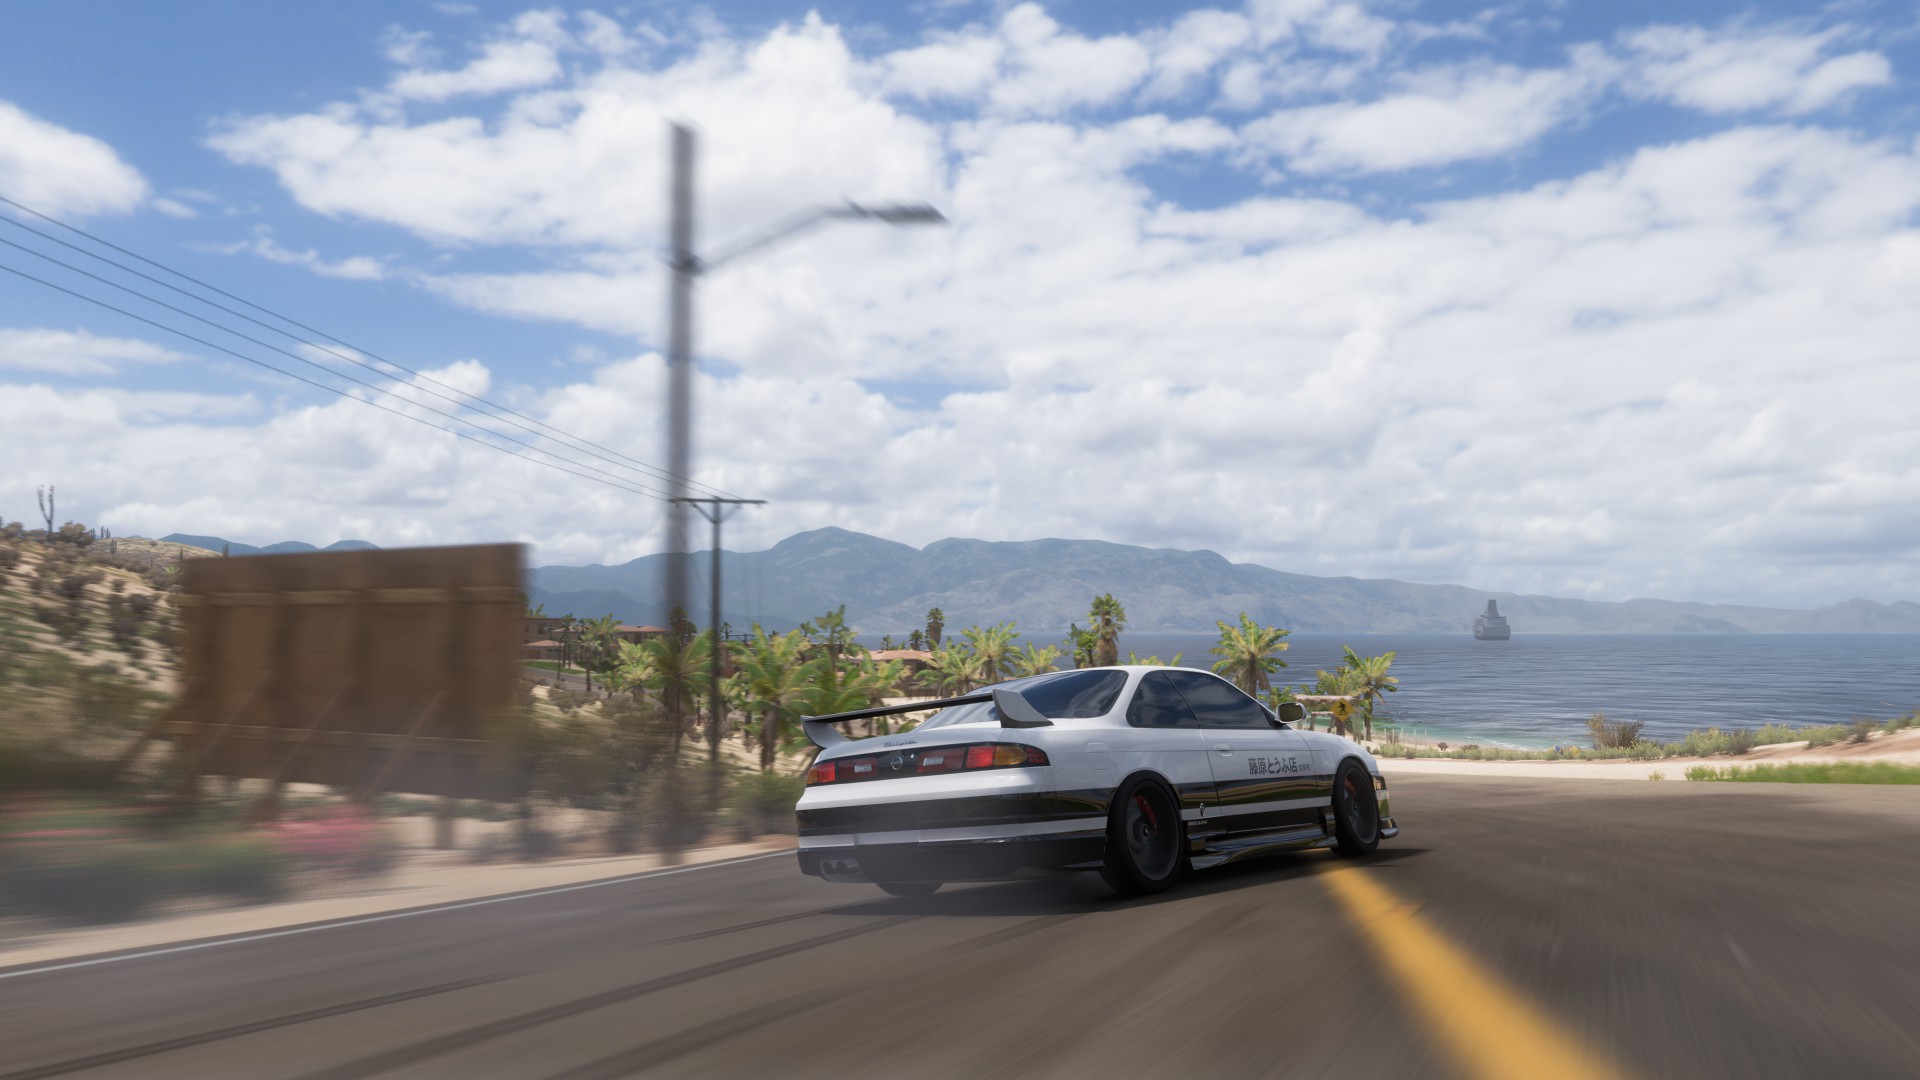 General 1920x1080 Initial D Nissan Silvia S14 Forza Horizon 5 Nissan Japanese cars video games PlaygroundGames sky clouds rear view video game art CGI motion blur palm trees billboards taillights